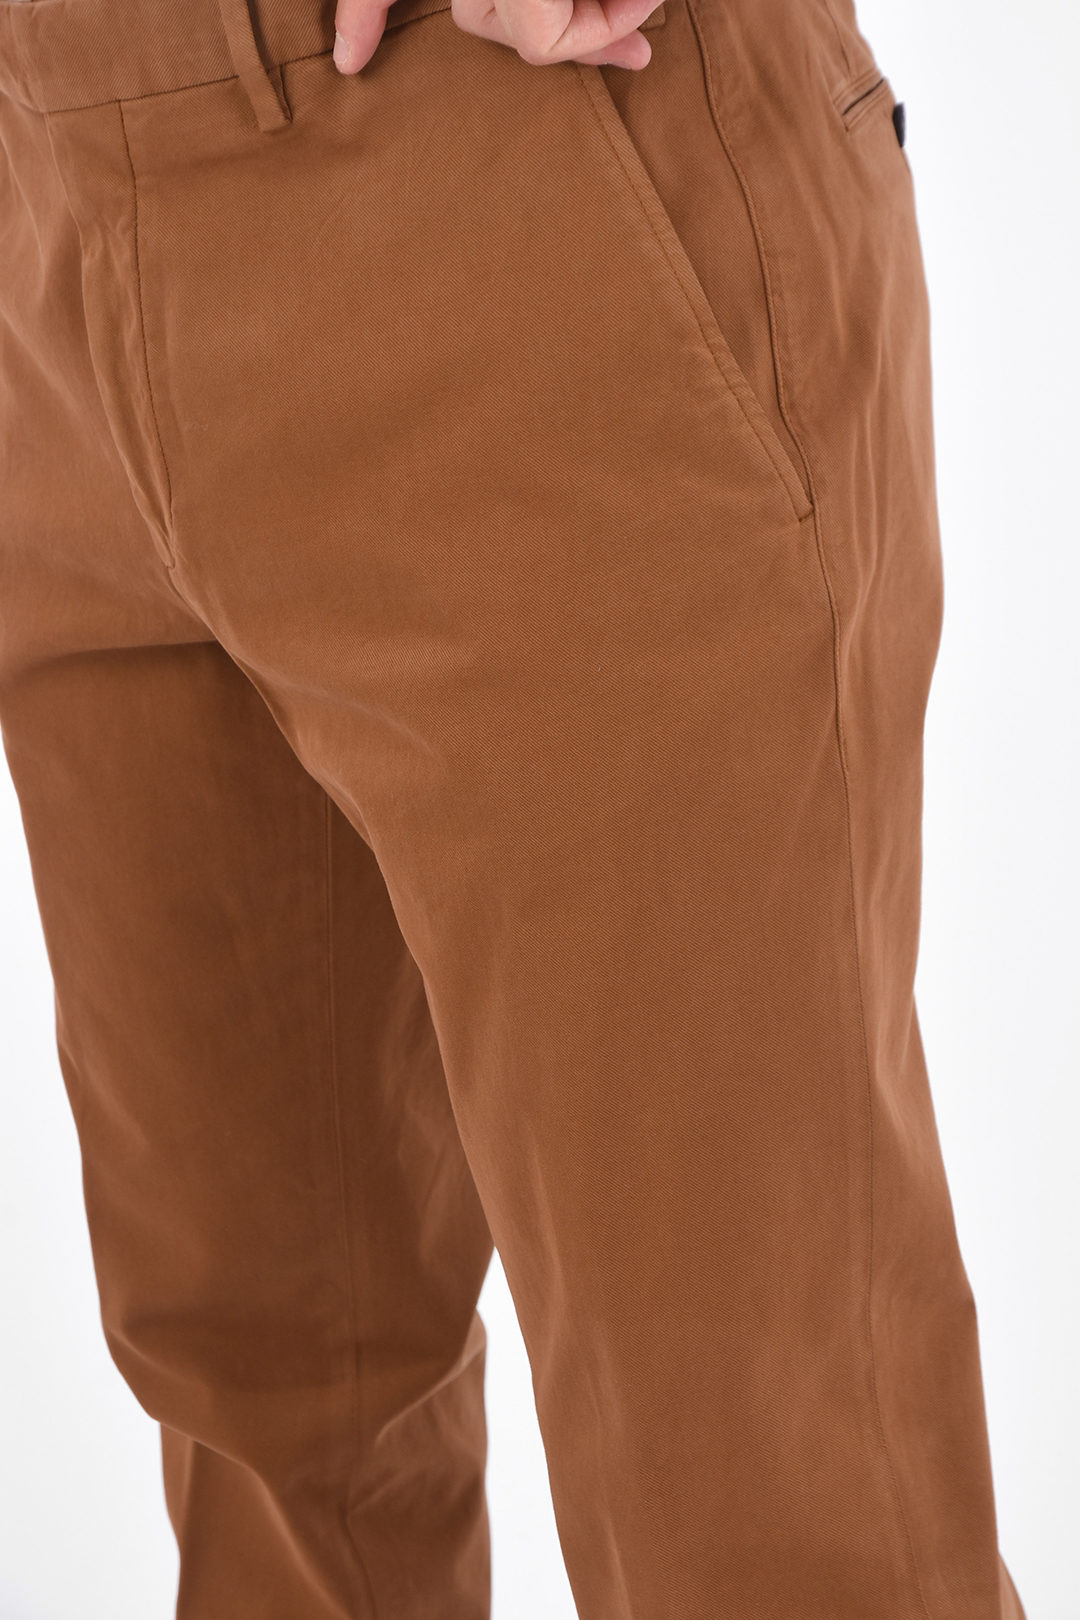 Eileen Fisher Organic Stretch Cotton Twill Slim Ankle Pants | Bloomingdale's